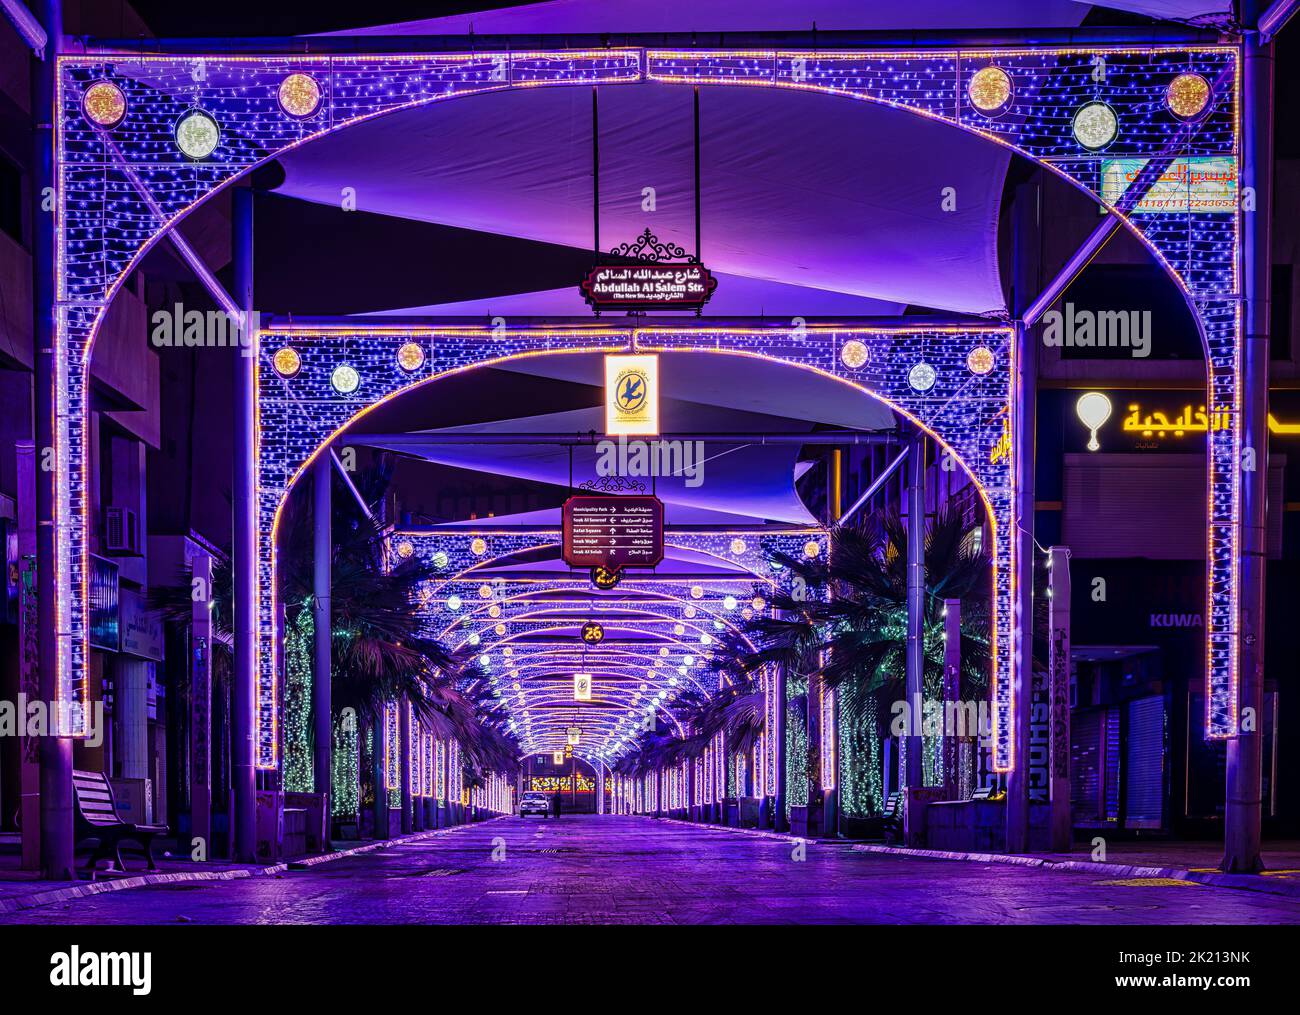 A beautiful shot of the Kuwait city market during night decorated with bright neon purple lights Stock Photo